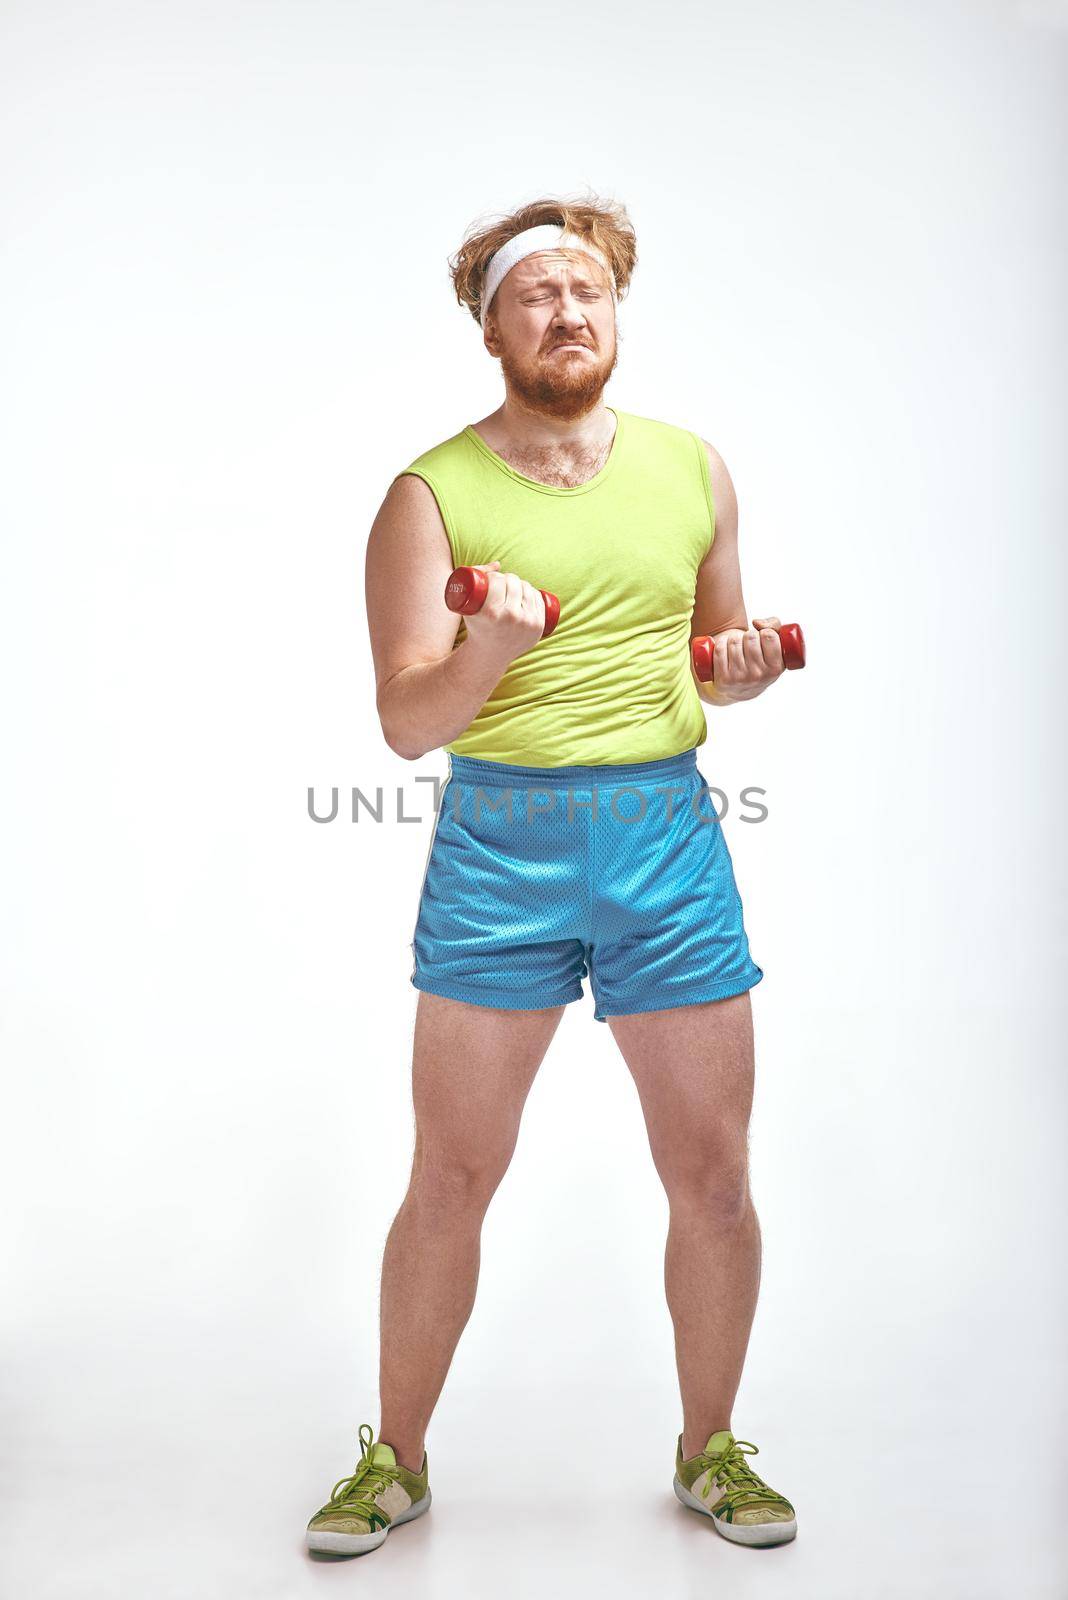 Red haired, bearded, plump man is holding the dumbbells by friendsstock